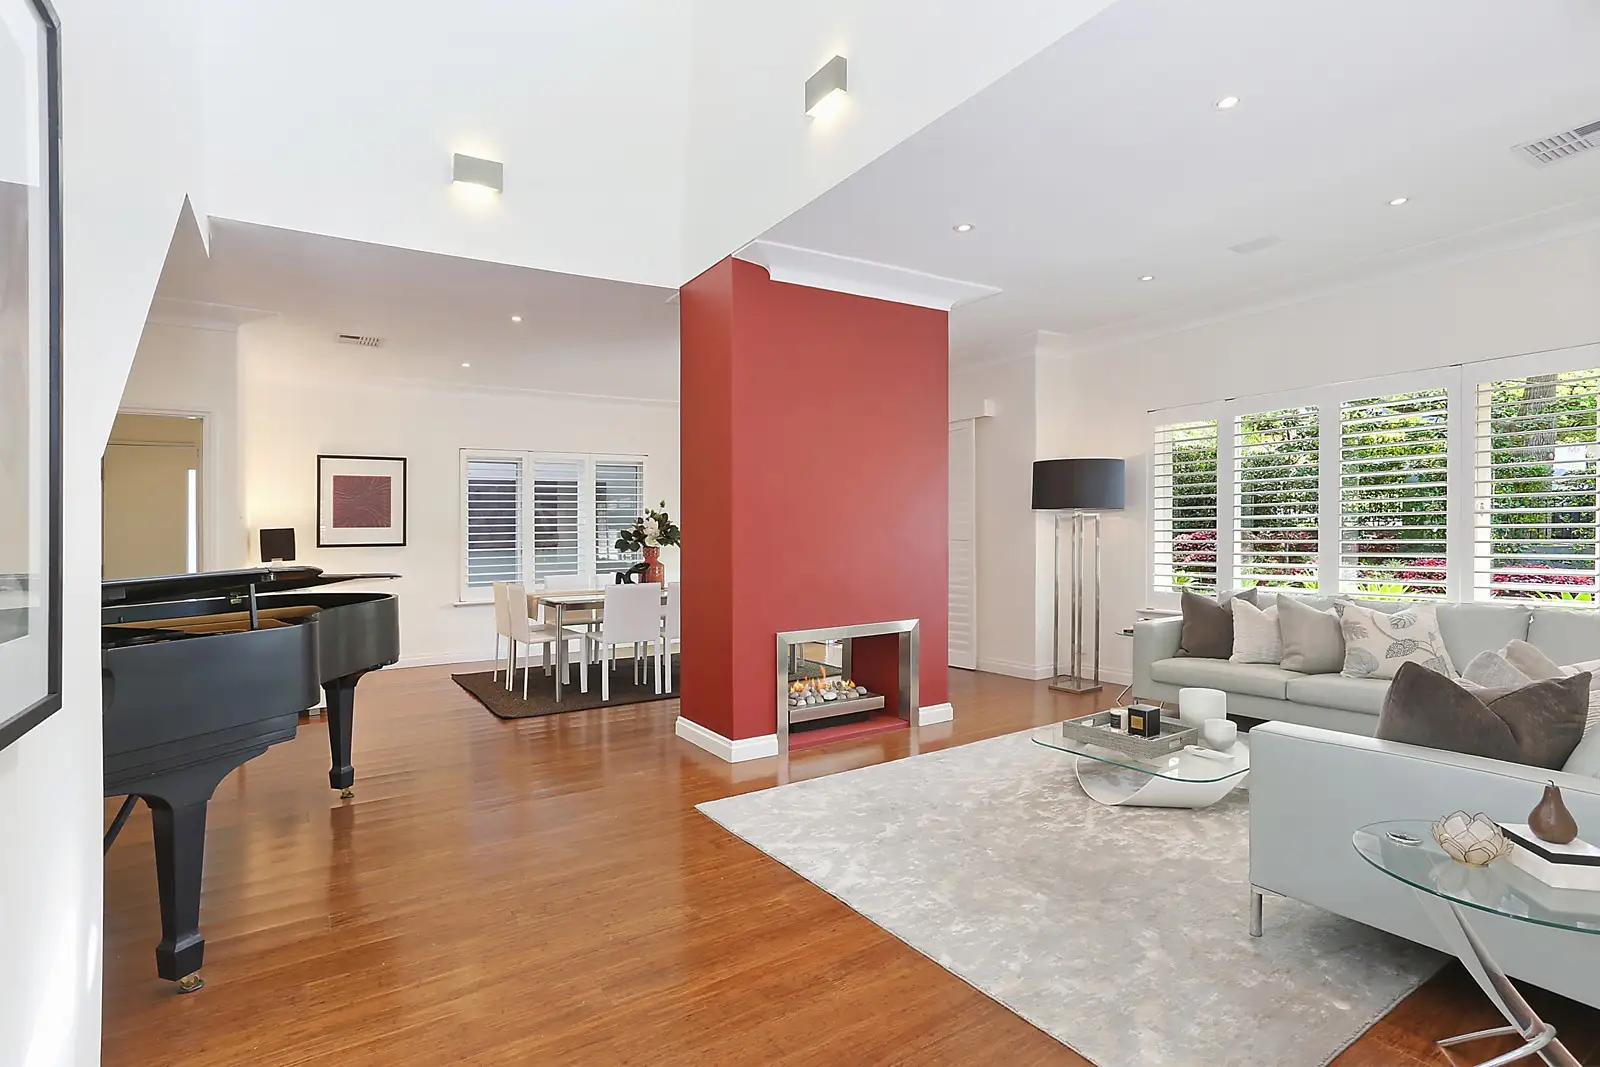 Photo #2: 12 Crown Road, Pymble - Sold by Sydney Sotheby's International Realty